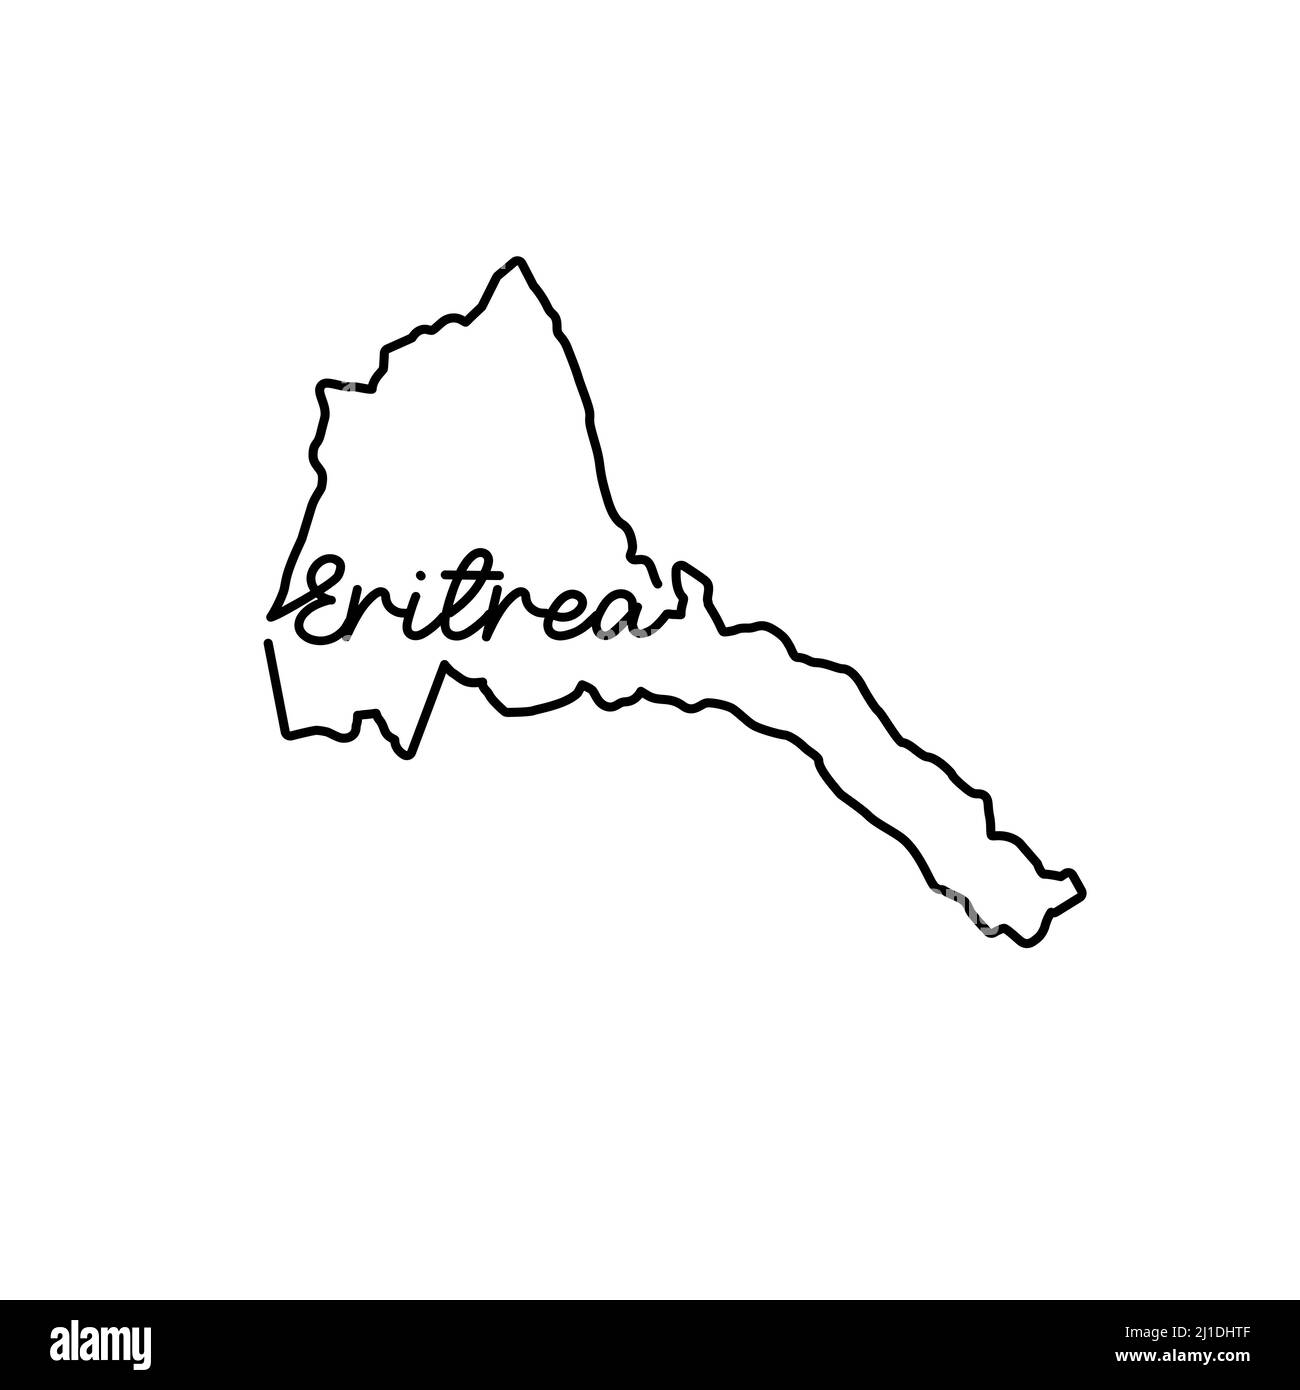 Eritrea outline map with the handwritten country name. Continuous line drawing of patriotic home sign. A love for a small homeland. T-shirt print idea Stock Vector